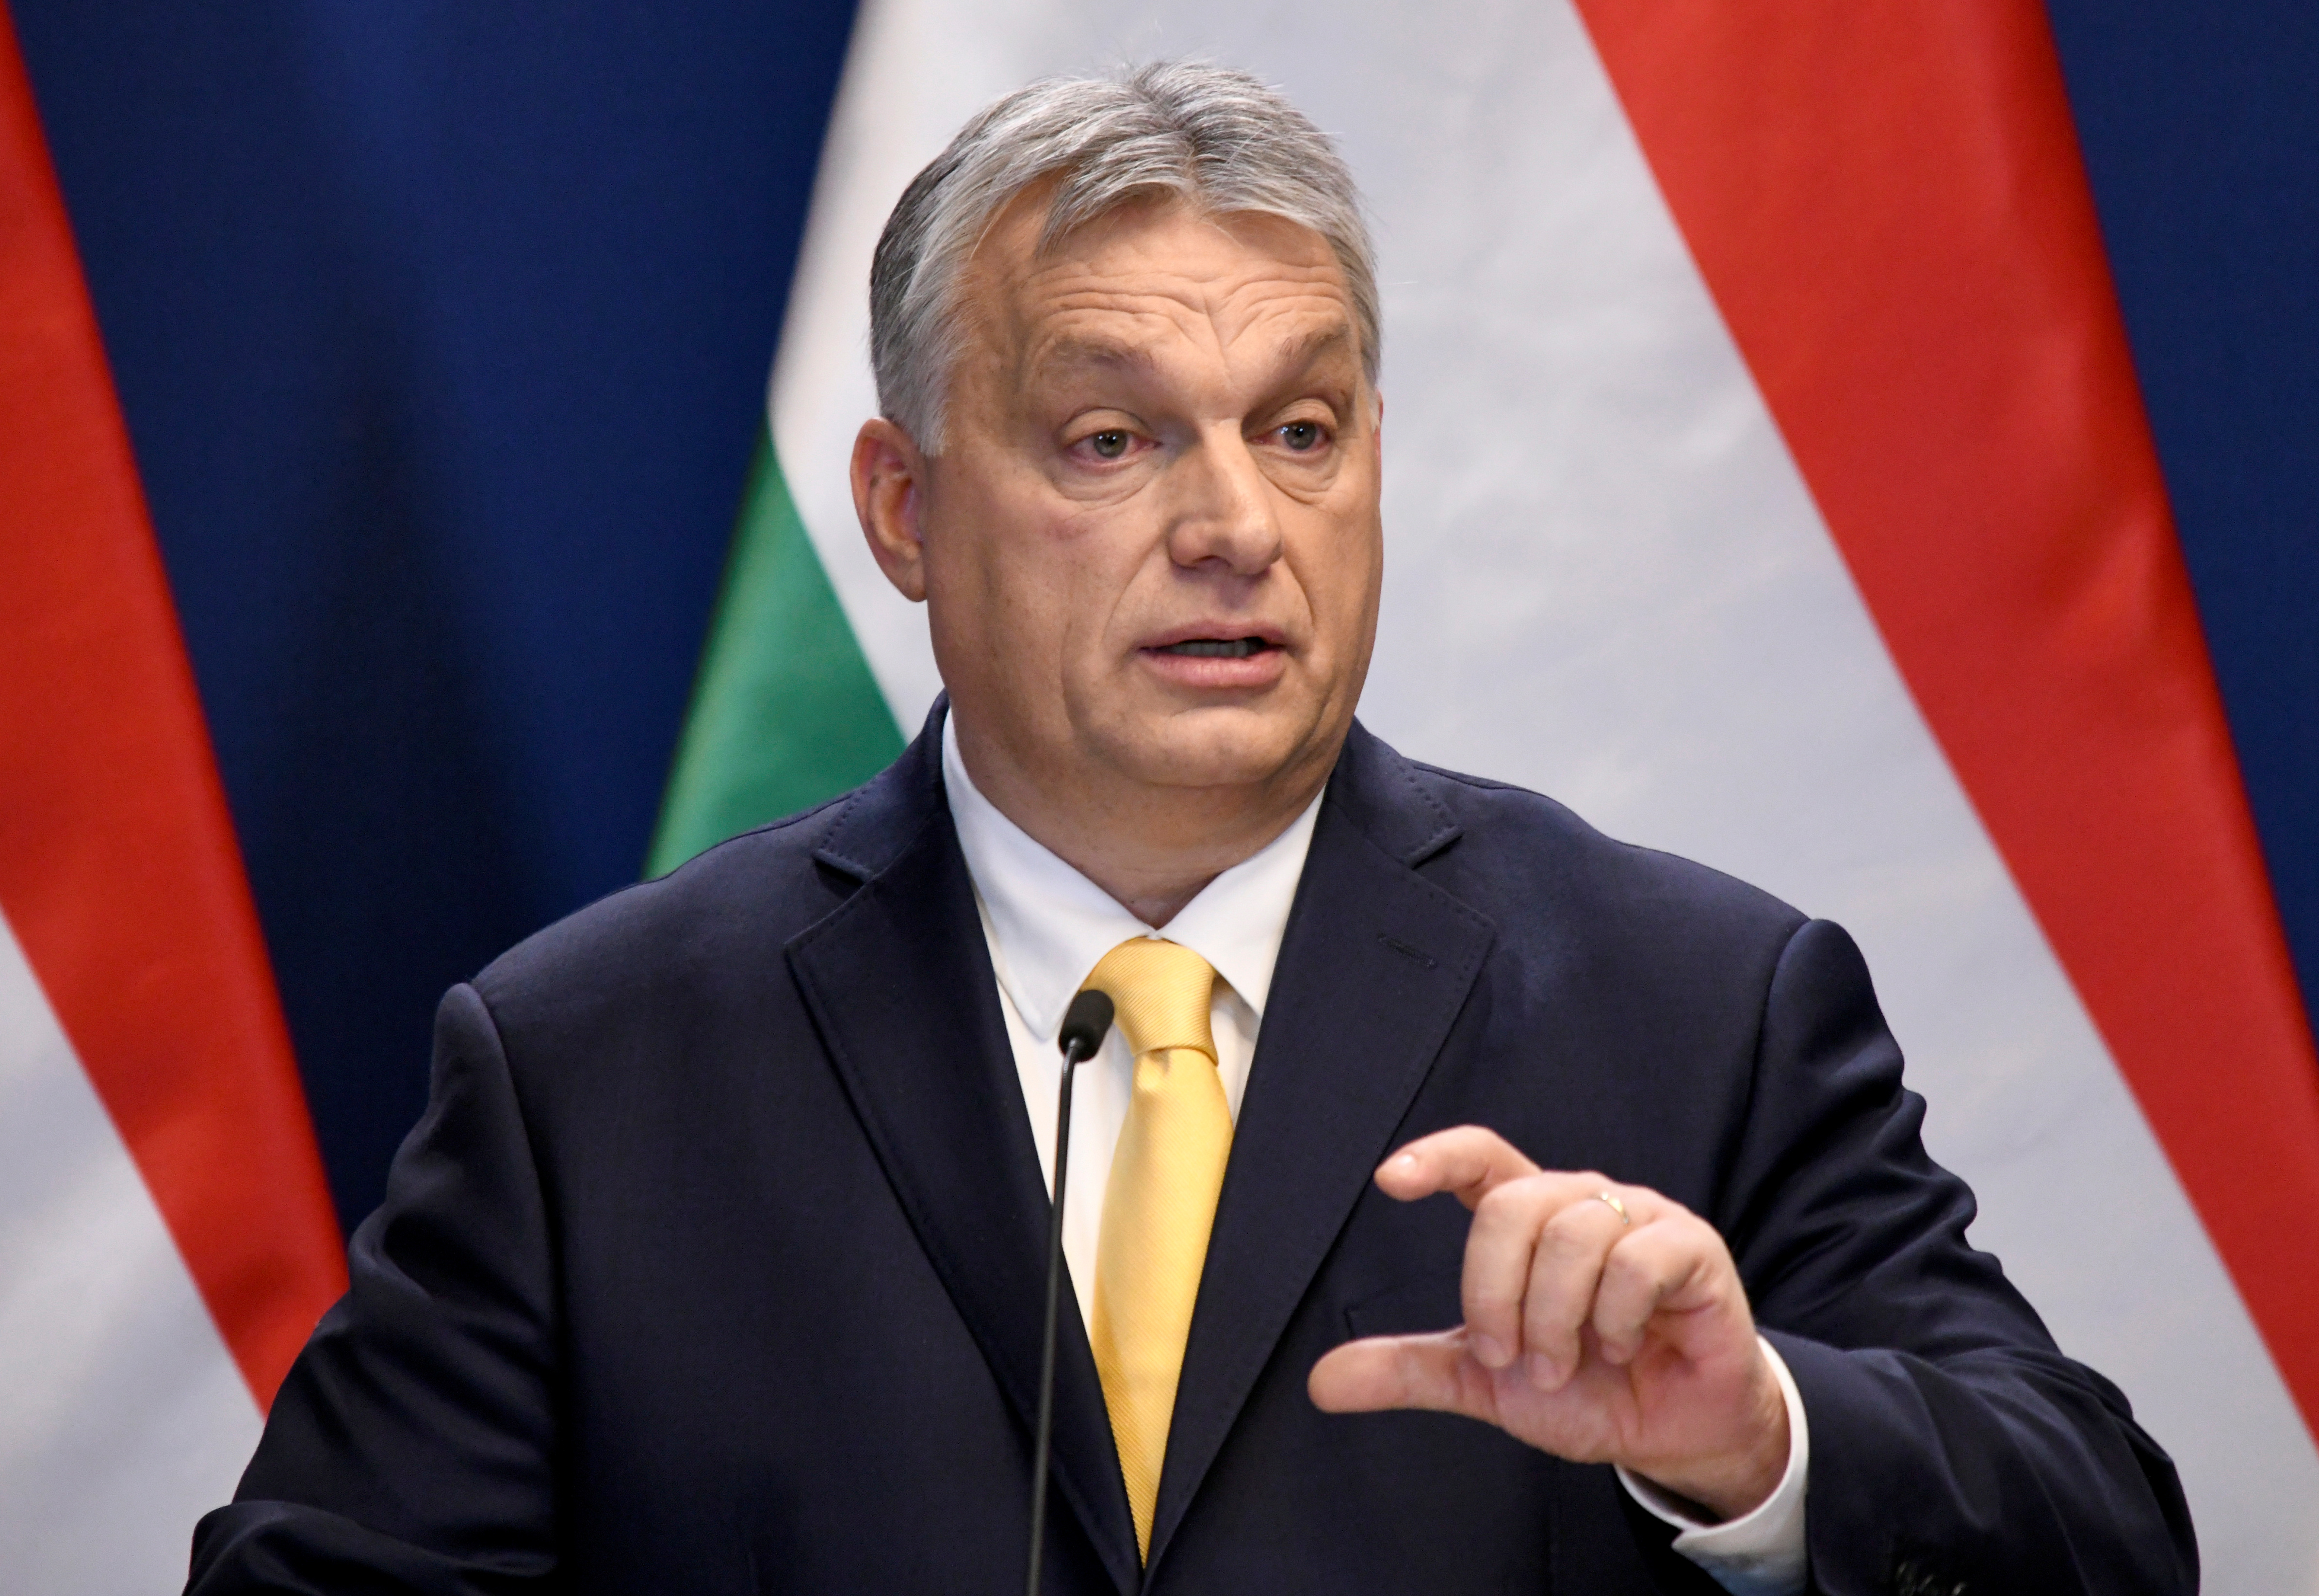 Hungarian Prime Minister Viktor Orban holds an international news conference in Budapest, Hungary, January 9, 2020. REUTERS/Tamas Kaszas